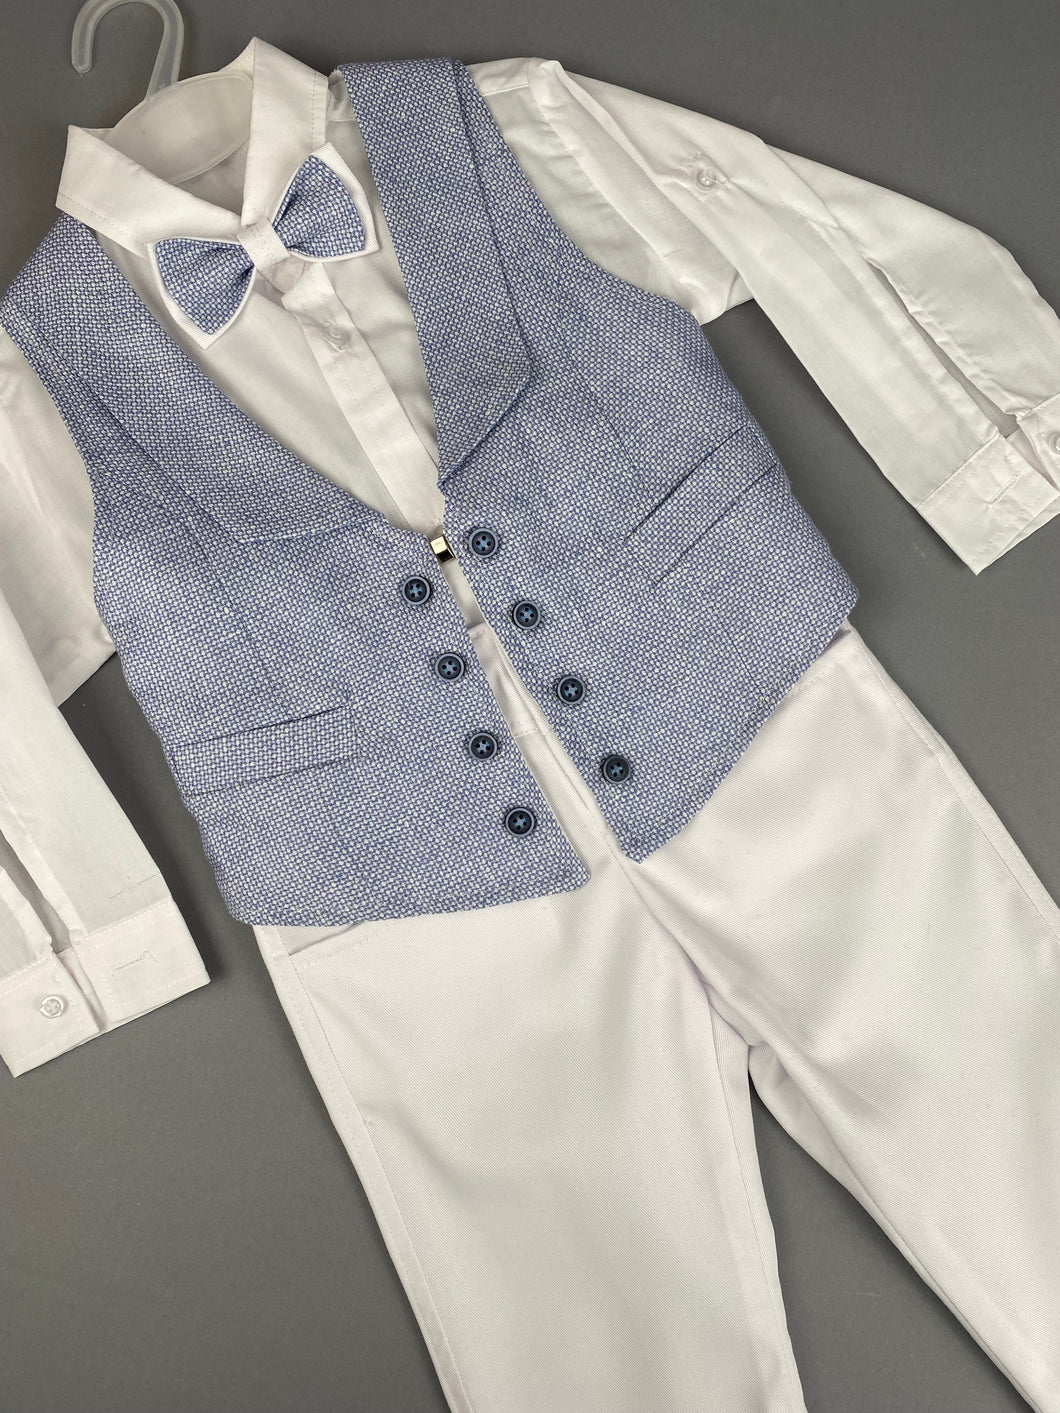 Rosies Collections 7pc Suit, Pants, Vest, Dress Shirt, Bow Tie, Belt and Hat, made in Greece,  exclusively for Rosies Collections. S202344